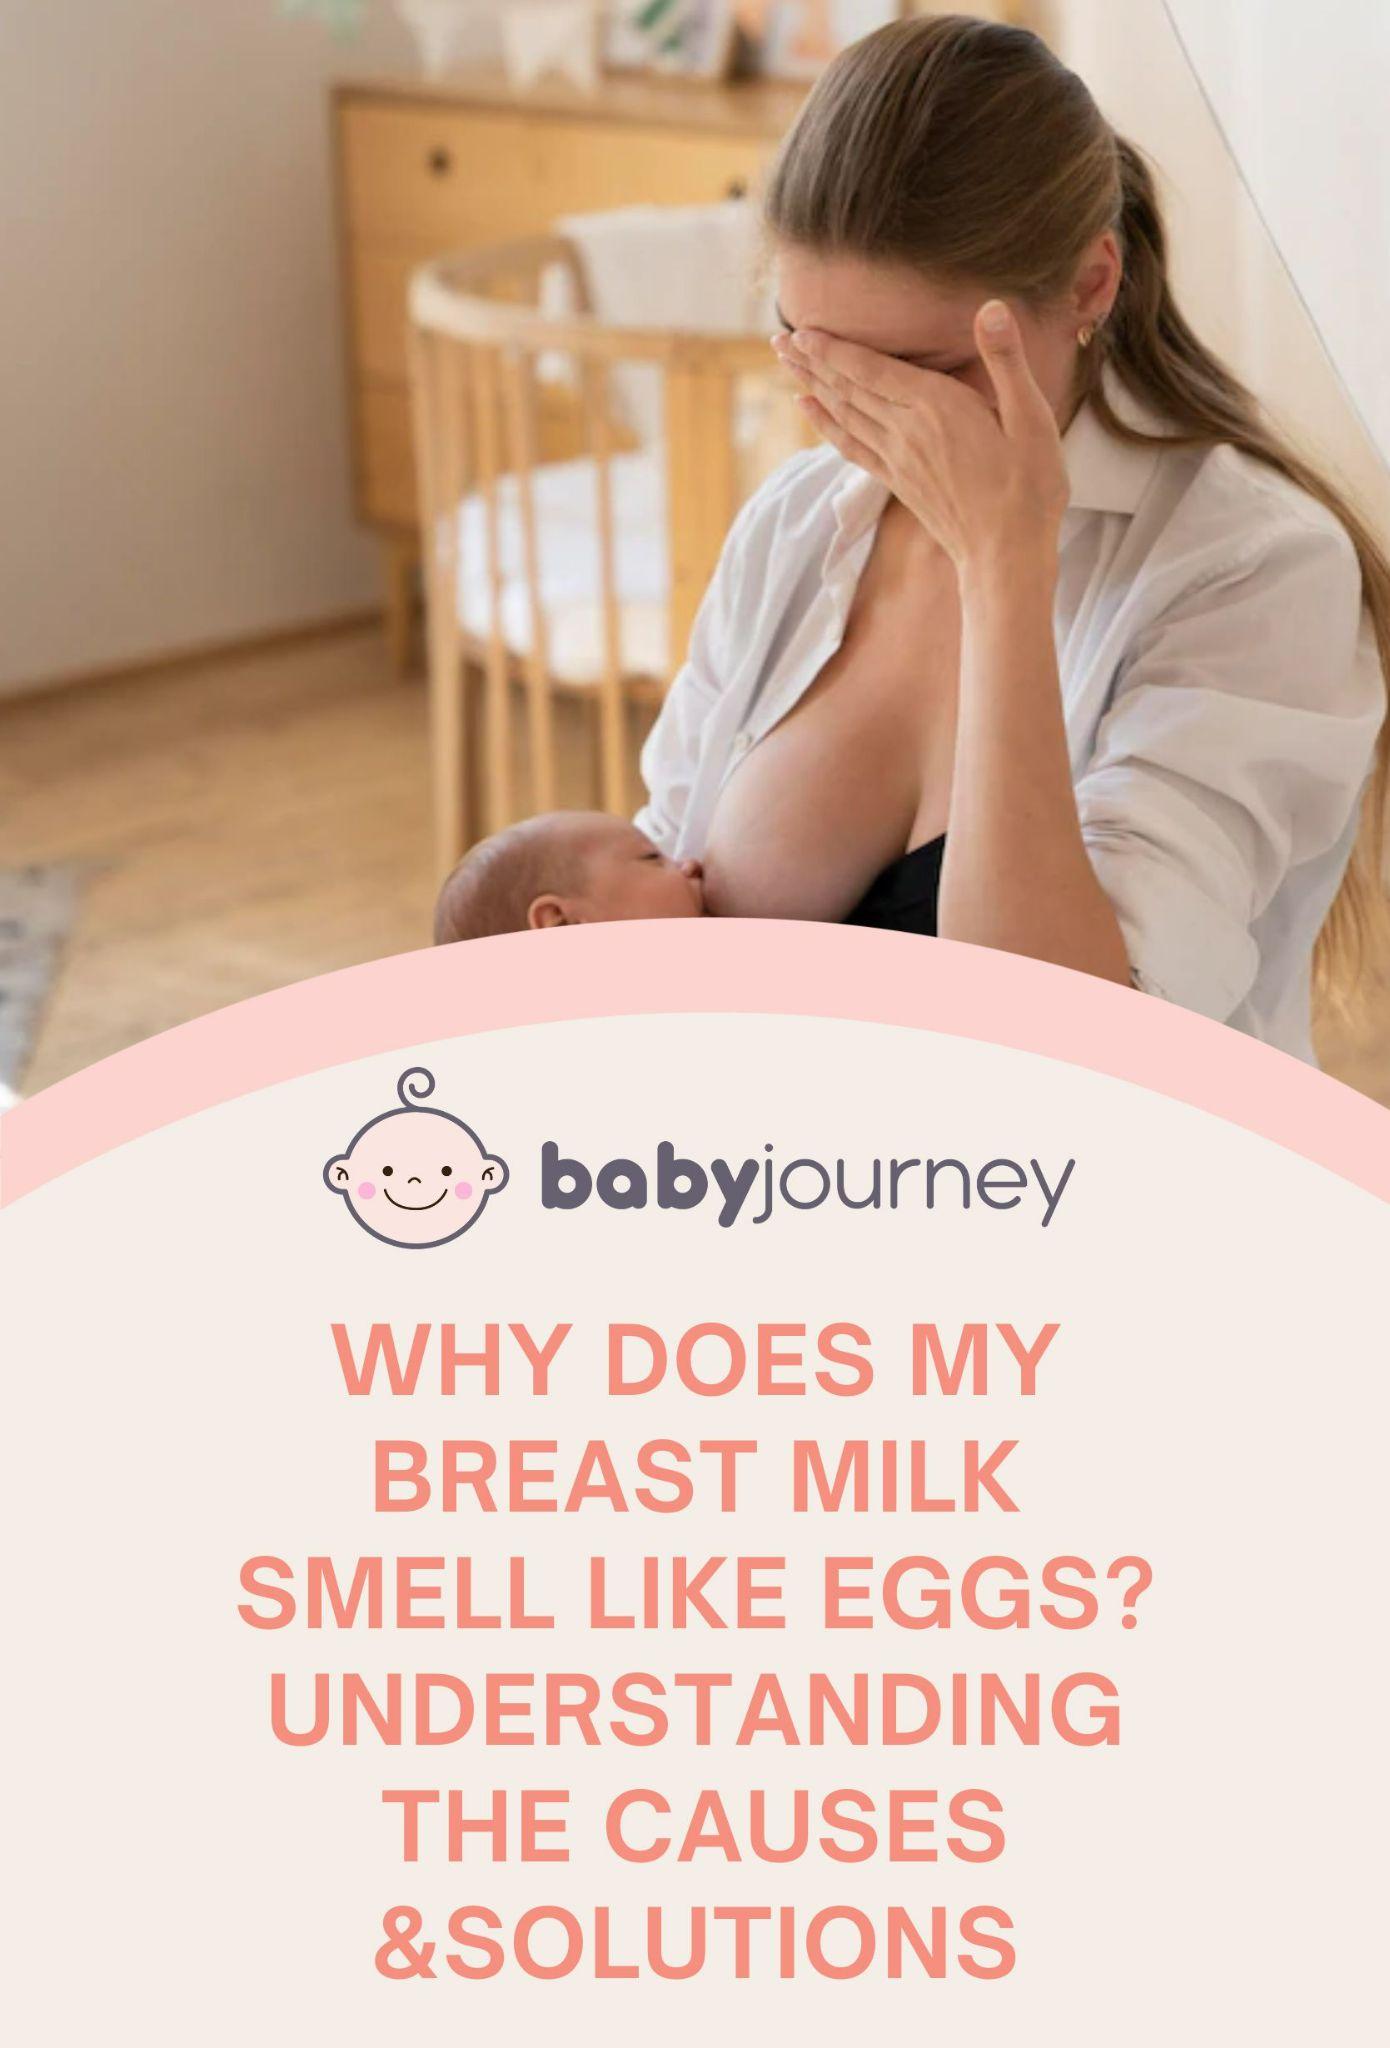 Why Does My Breast Milk Smell Like Eggs? Understanding the Causes & Solutions Pinterest Image - Baby Journey 